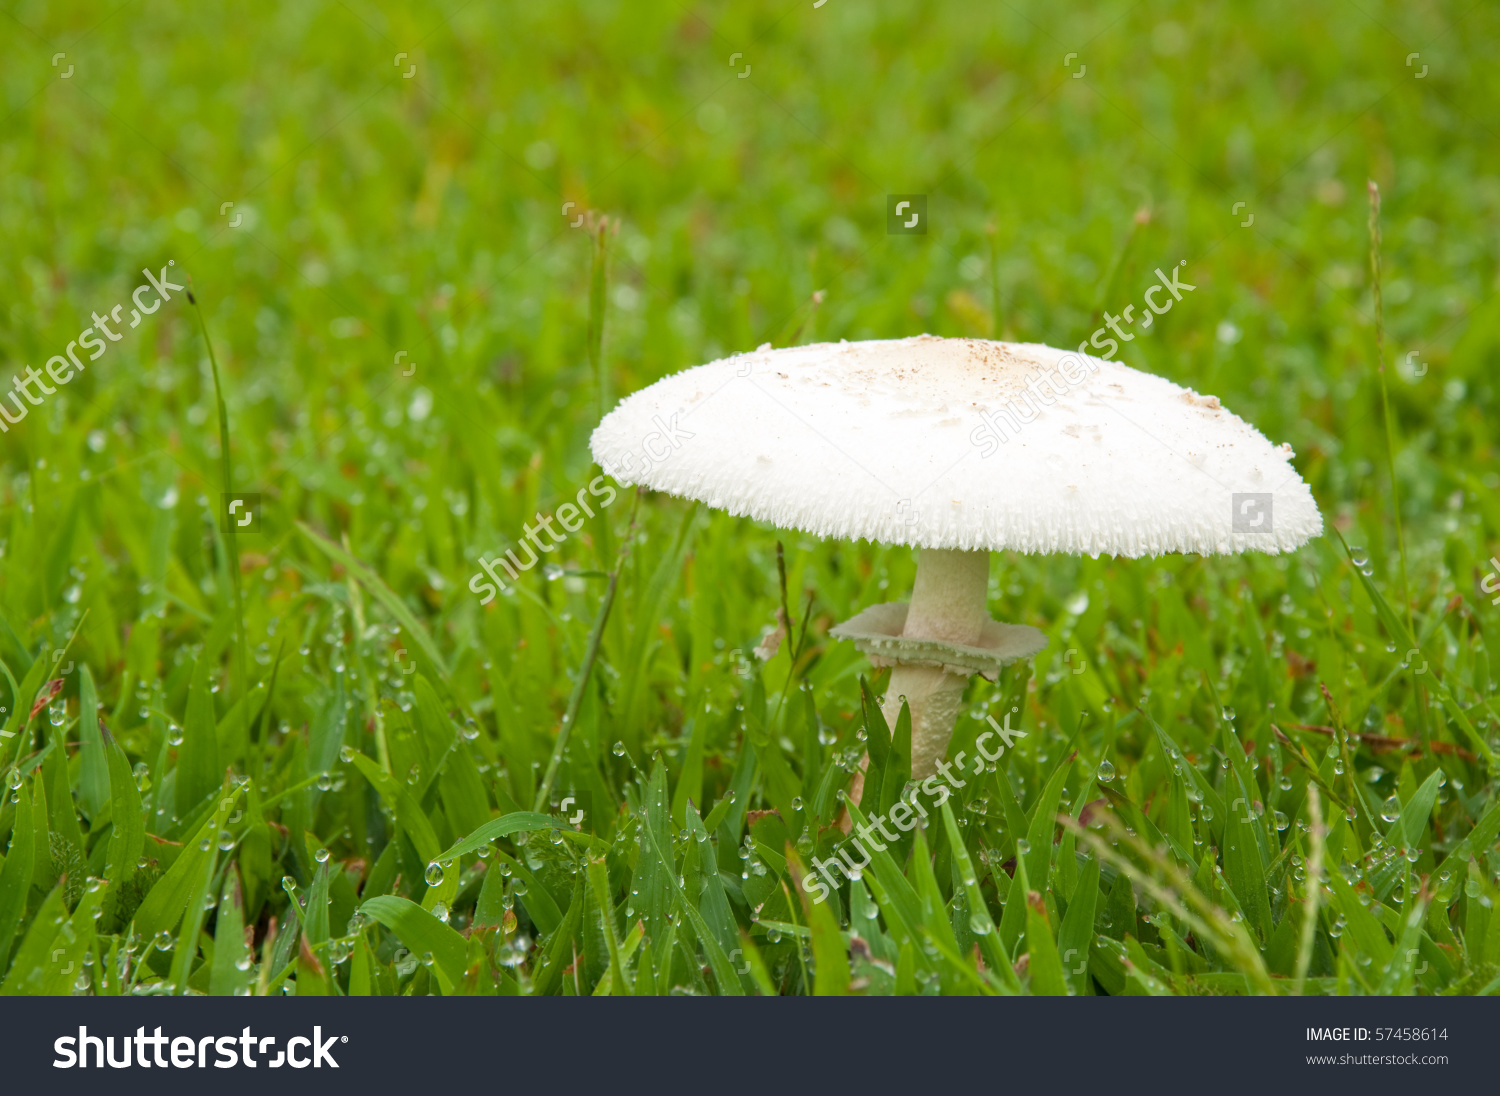 White Poisonous Mushroom In Grass With Heavy Morning Dew Stock.